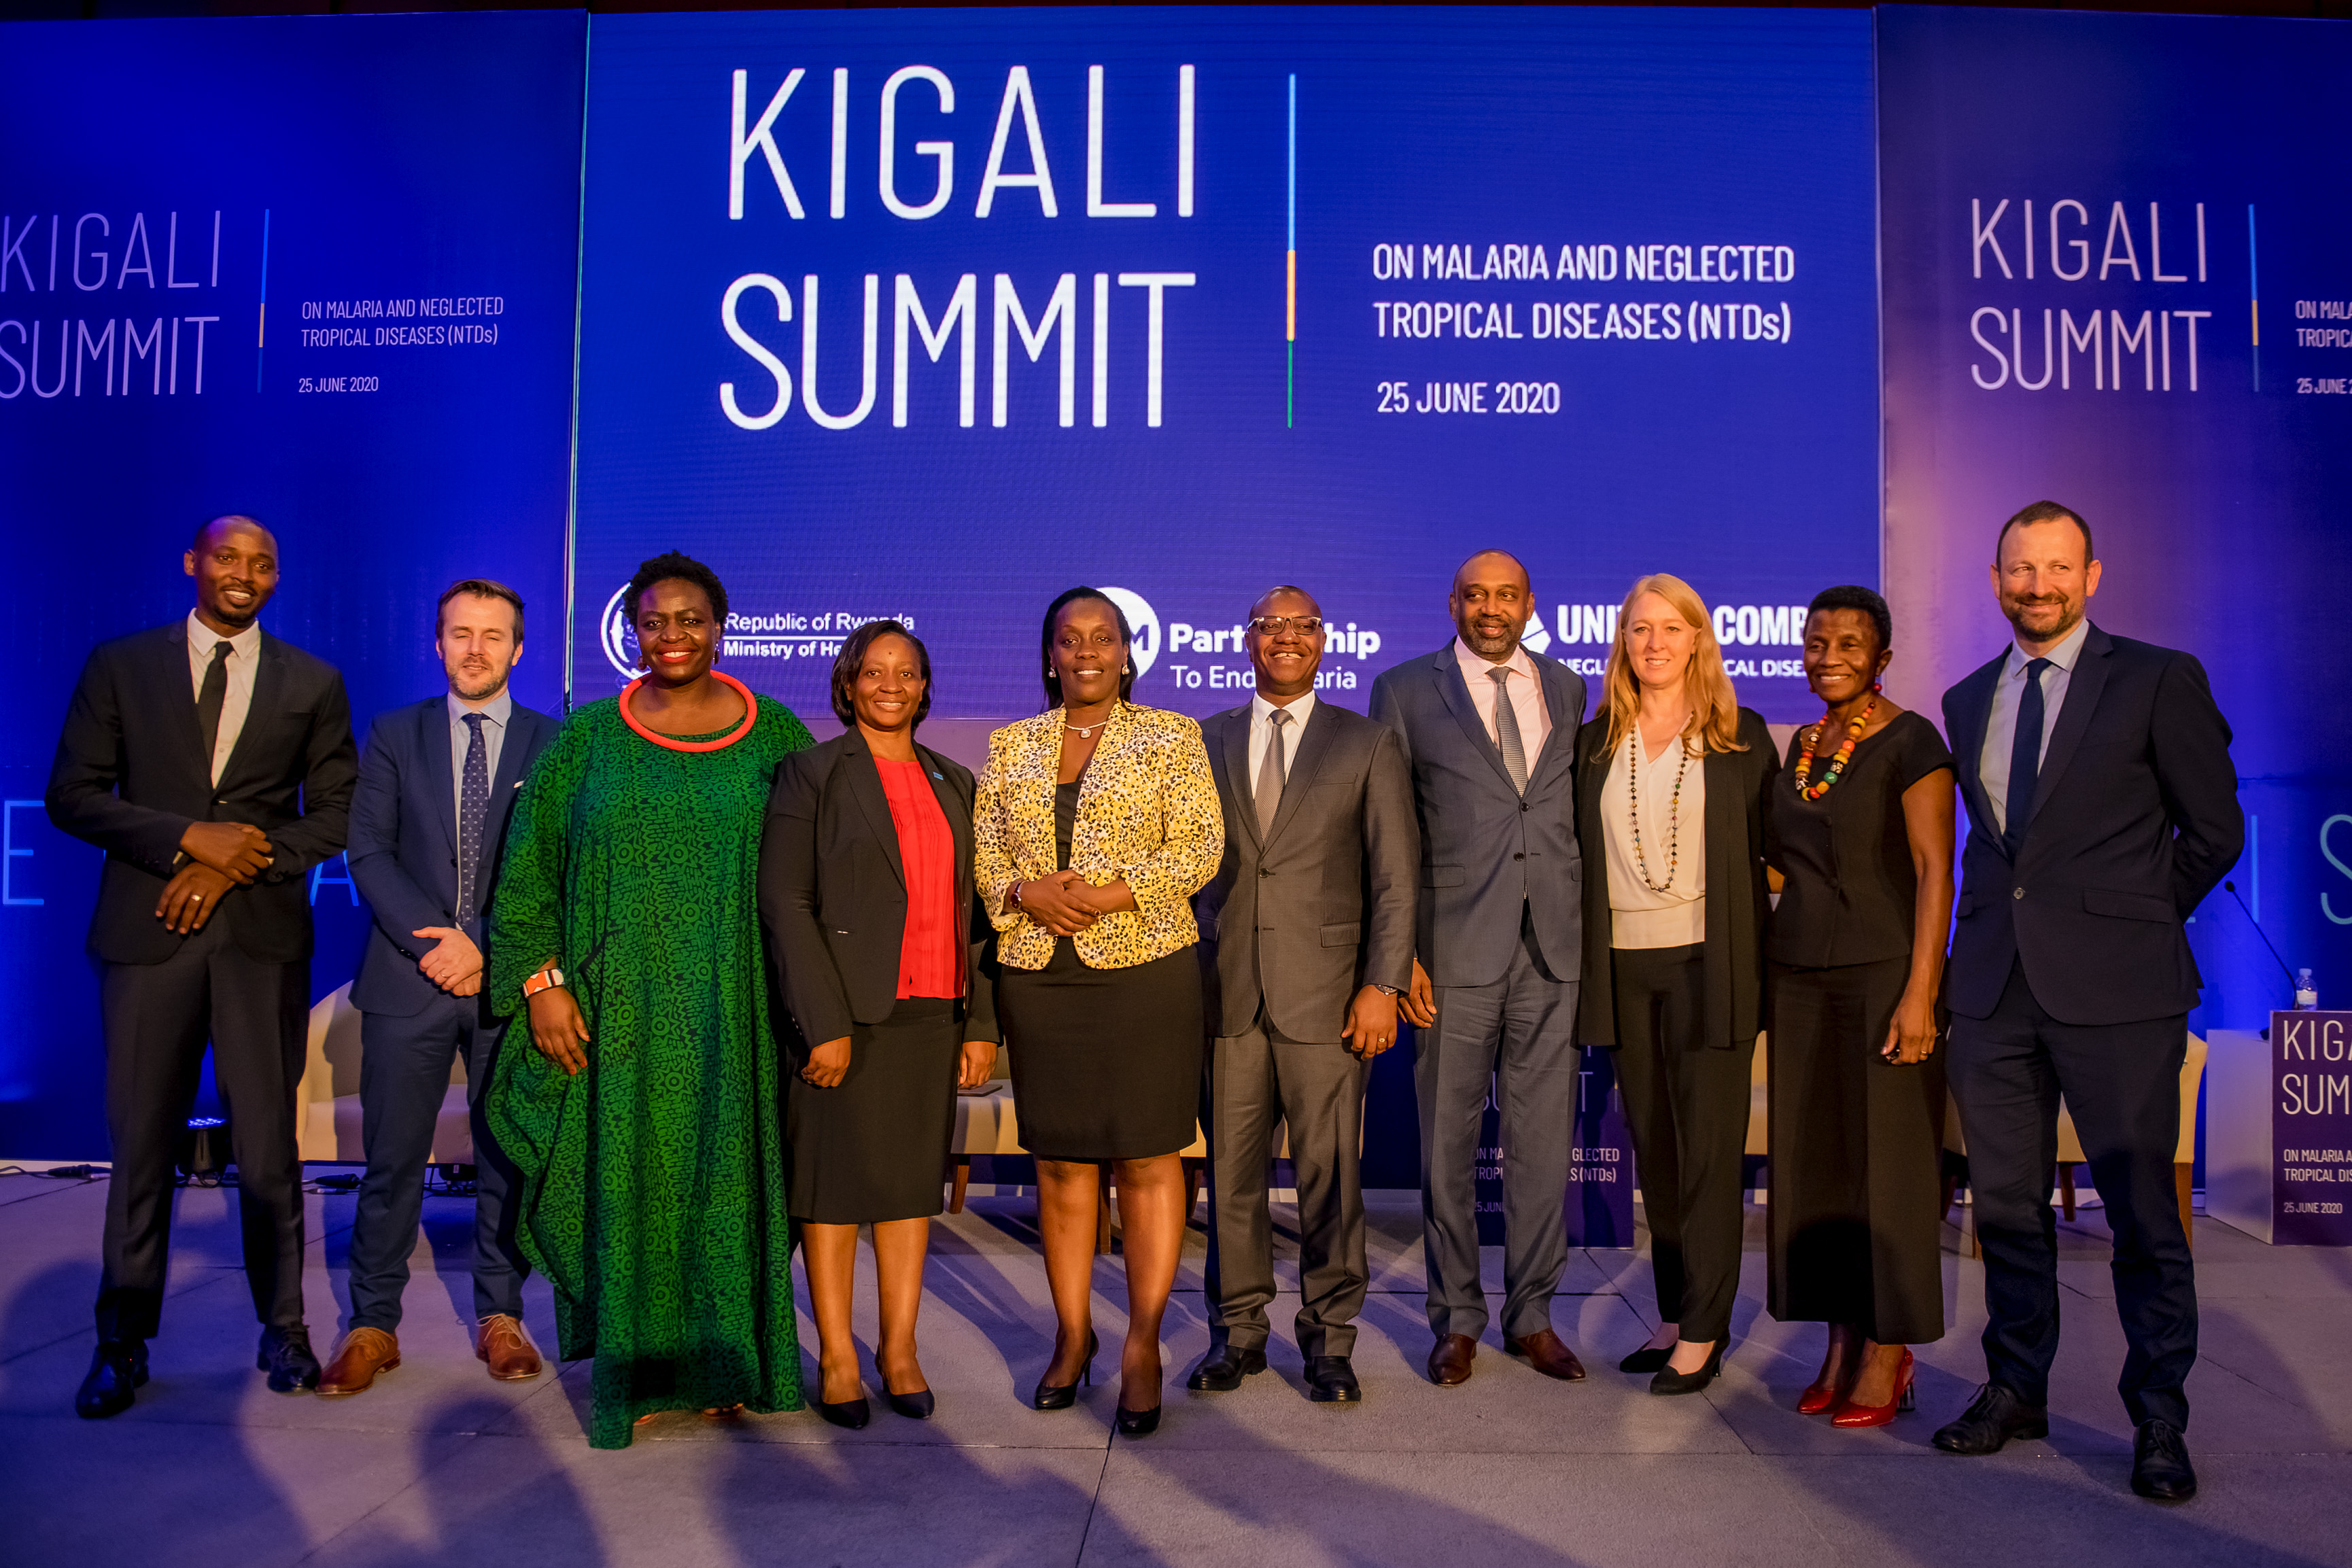 Participants of the launch of Kigali Summit on Malaria and NTDs pose for a group photo. 